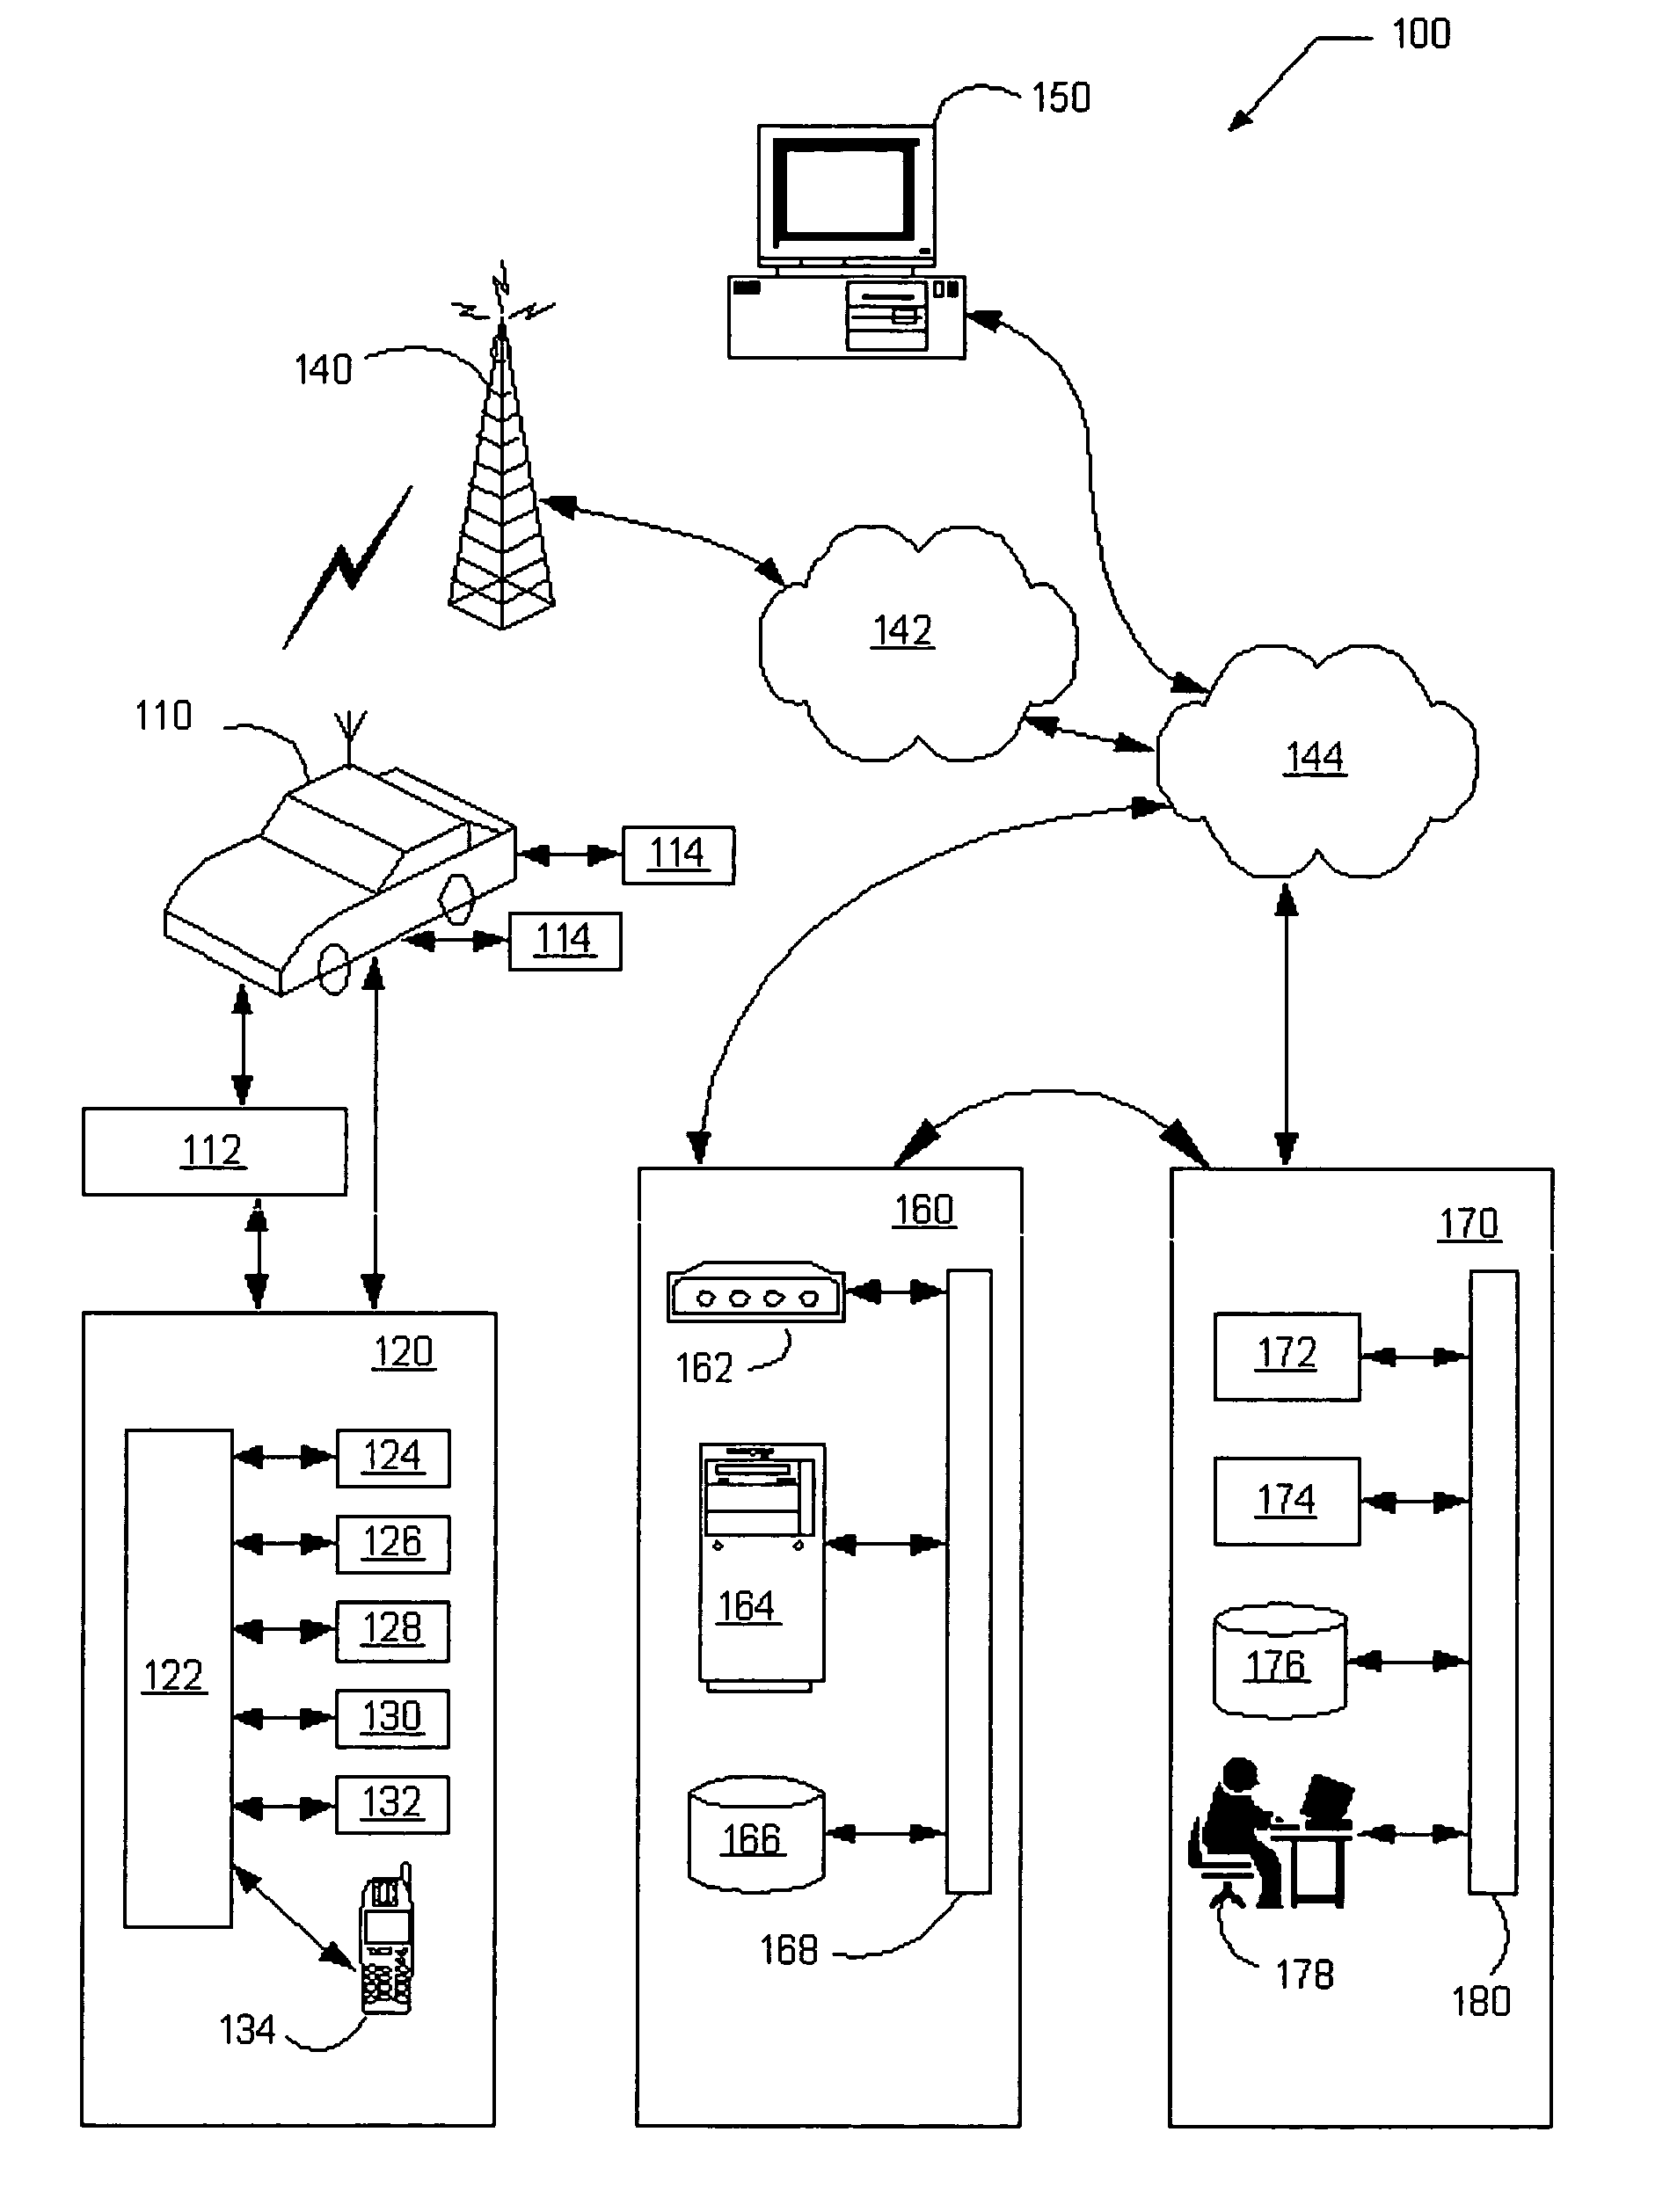 Method and system for remote reflash